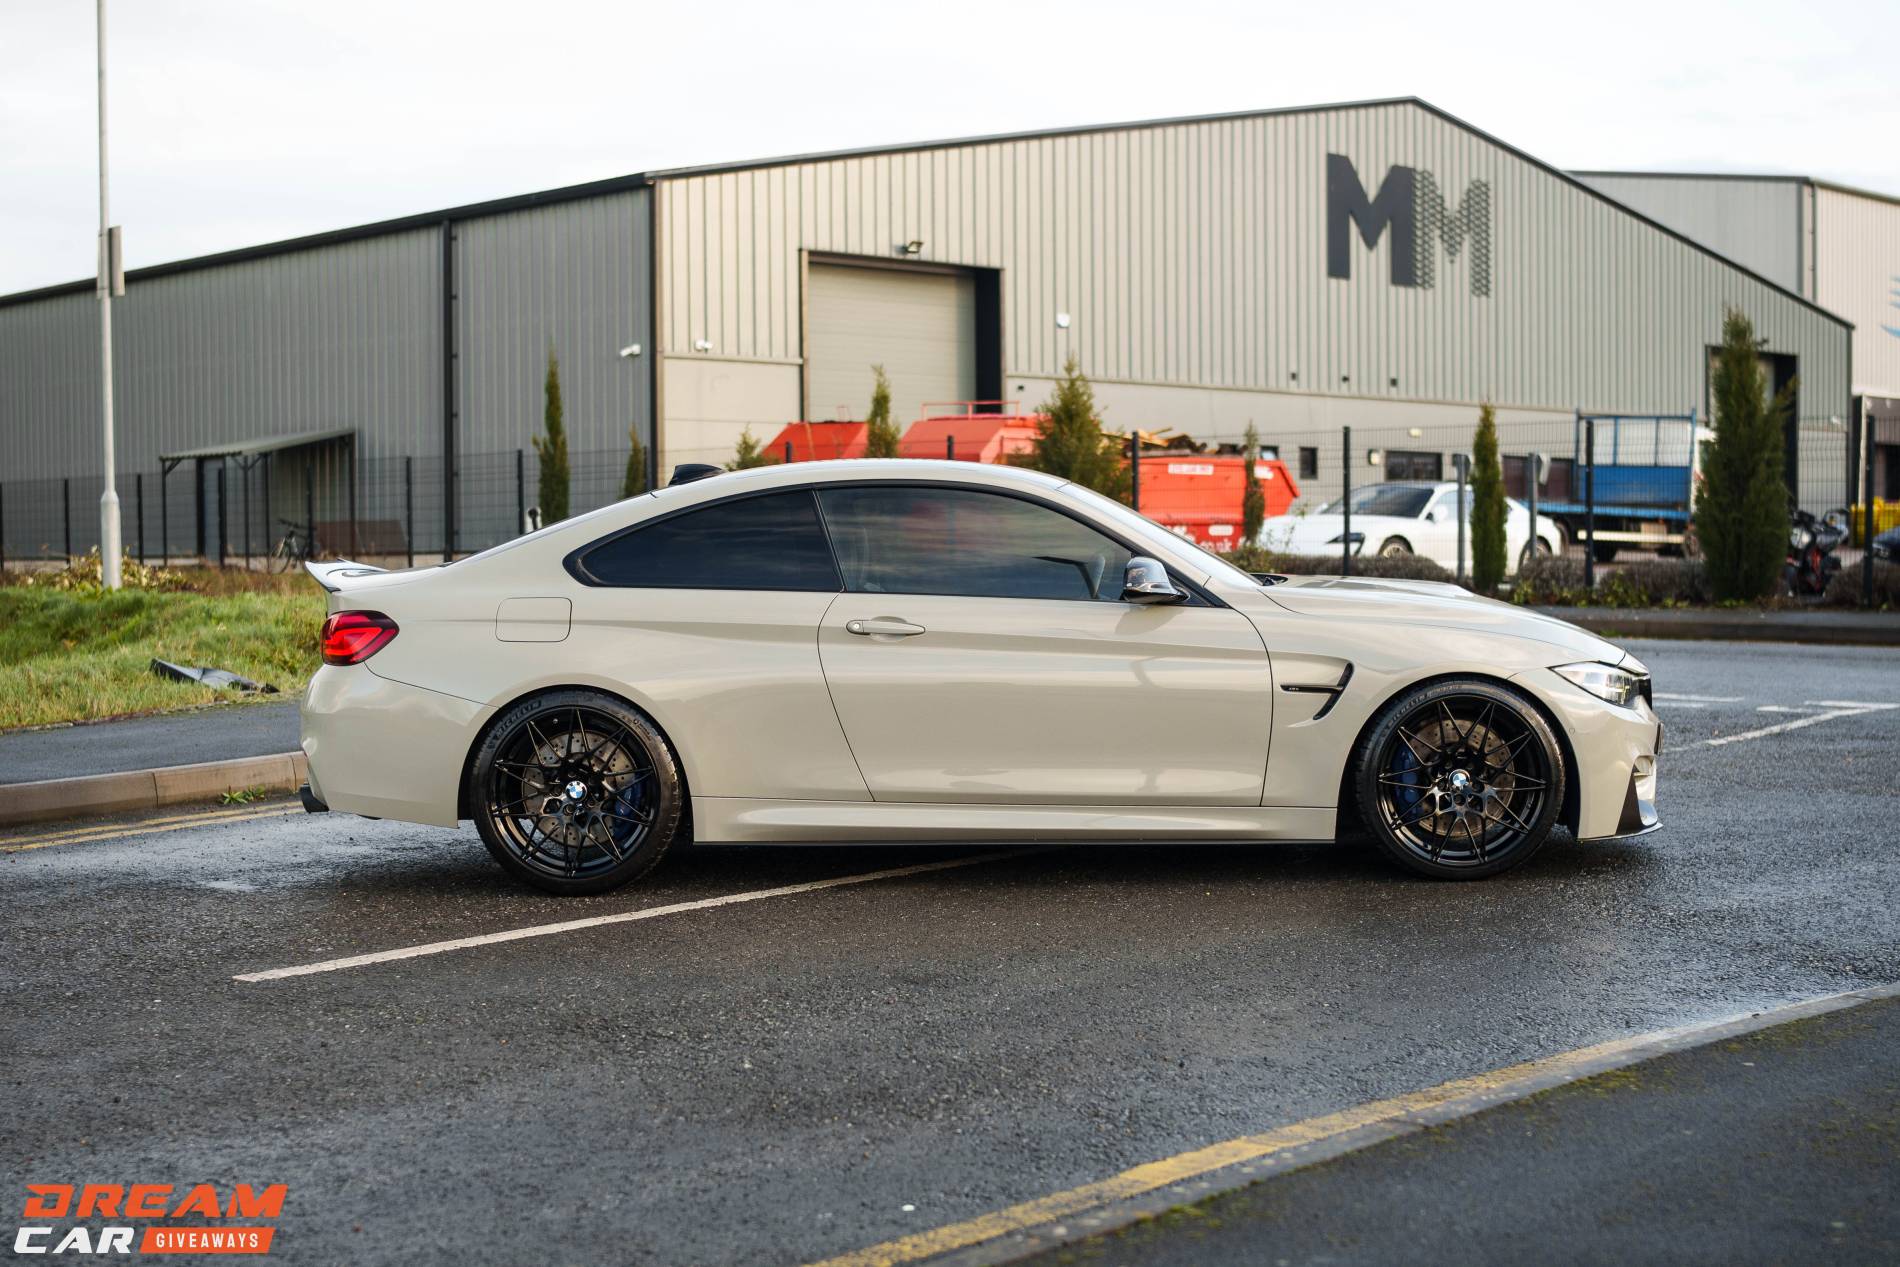 Win this 2020 BMW M4 & £1,000 or £34,000 Tax Free